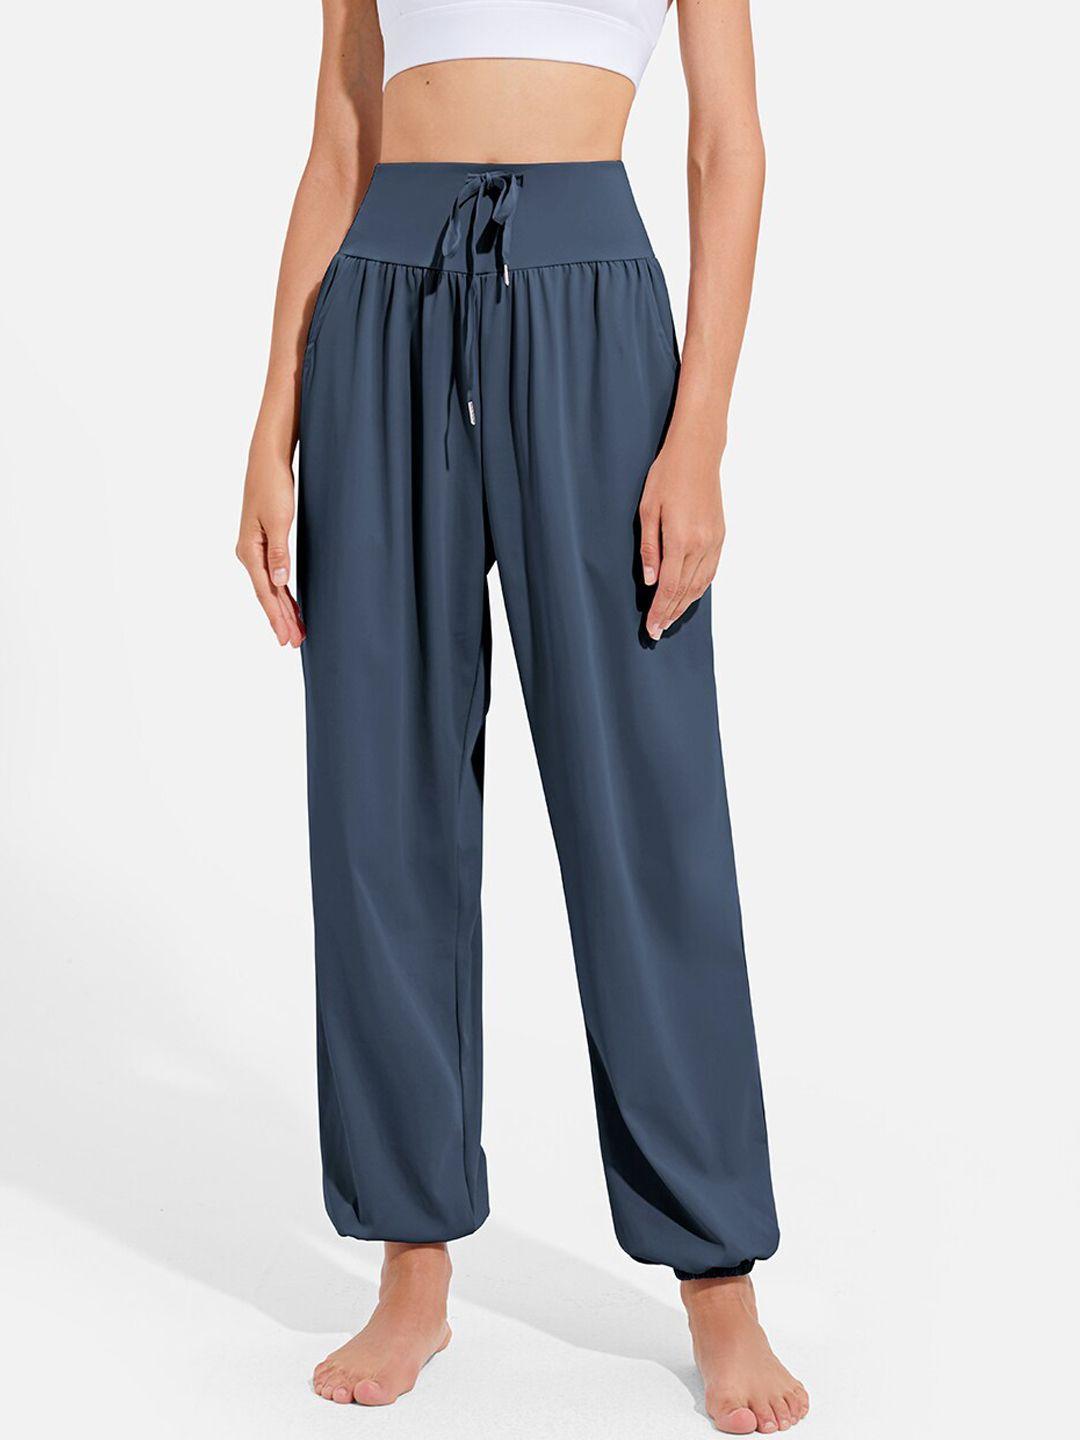 jc collection women navy blue solid dry fit track pant